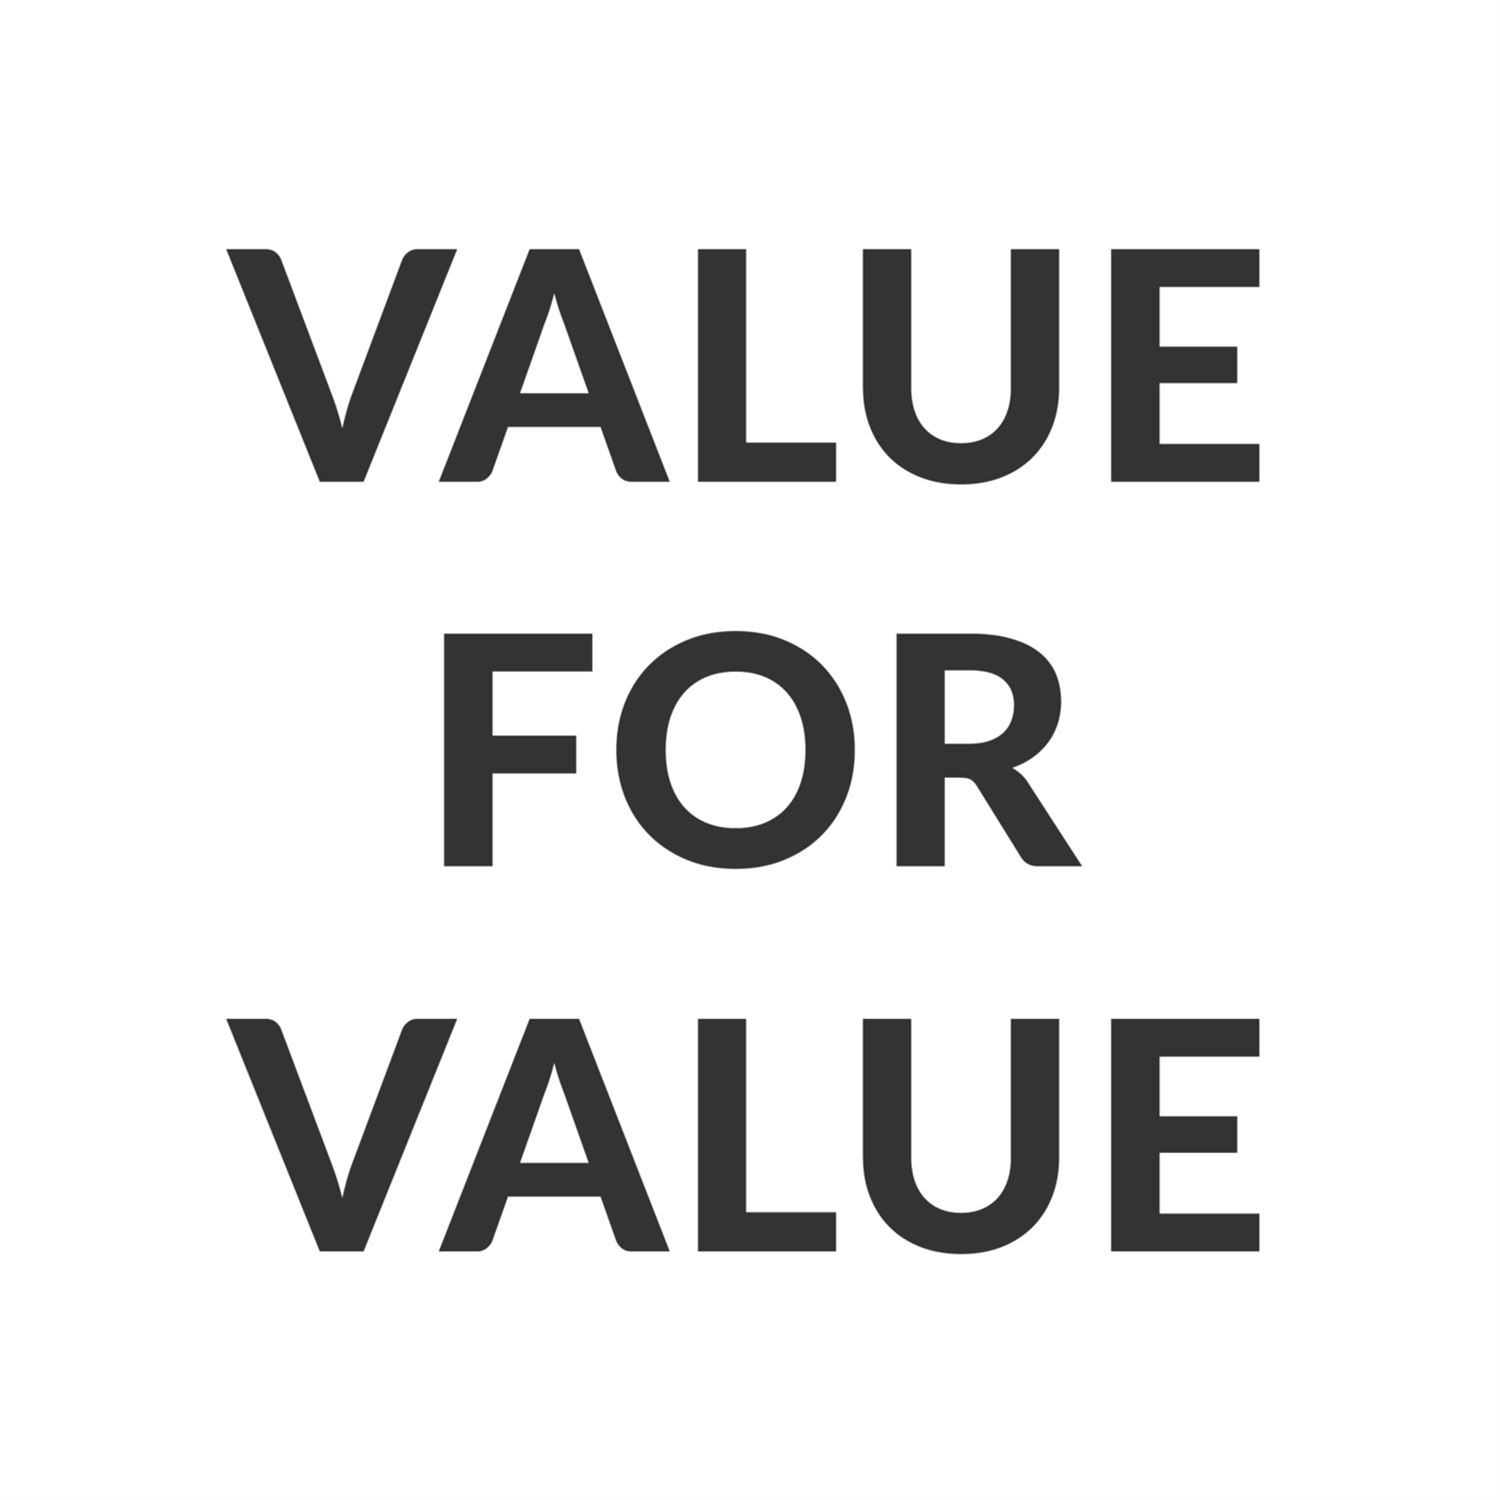 Value for value